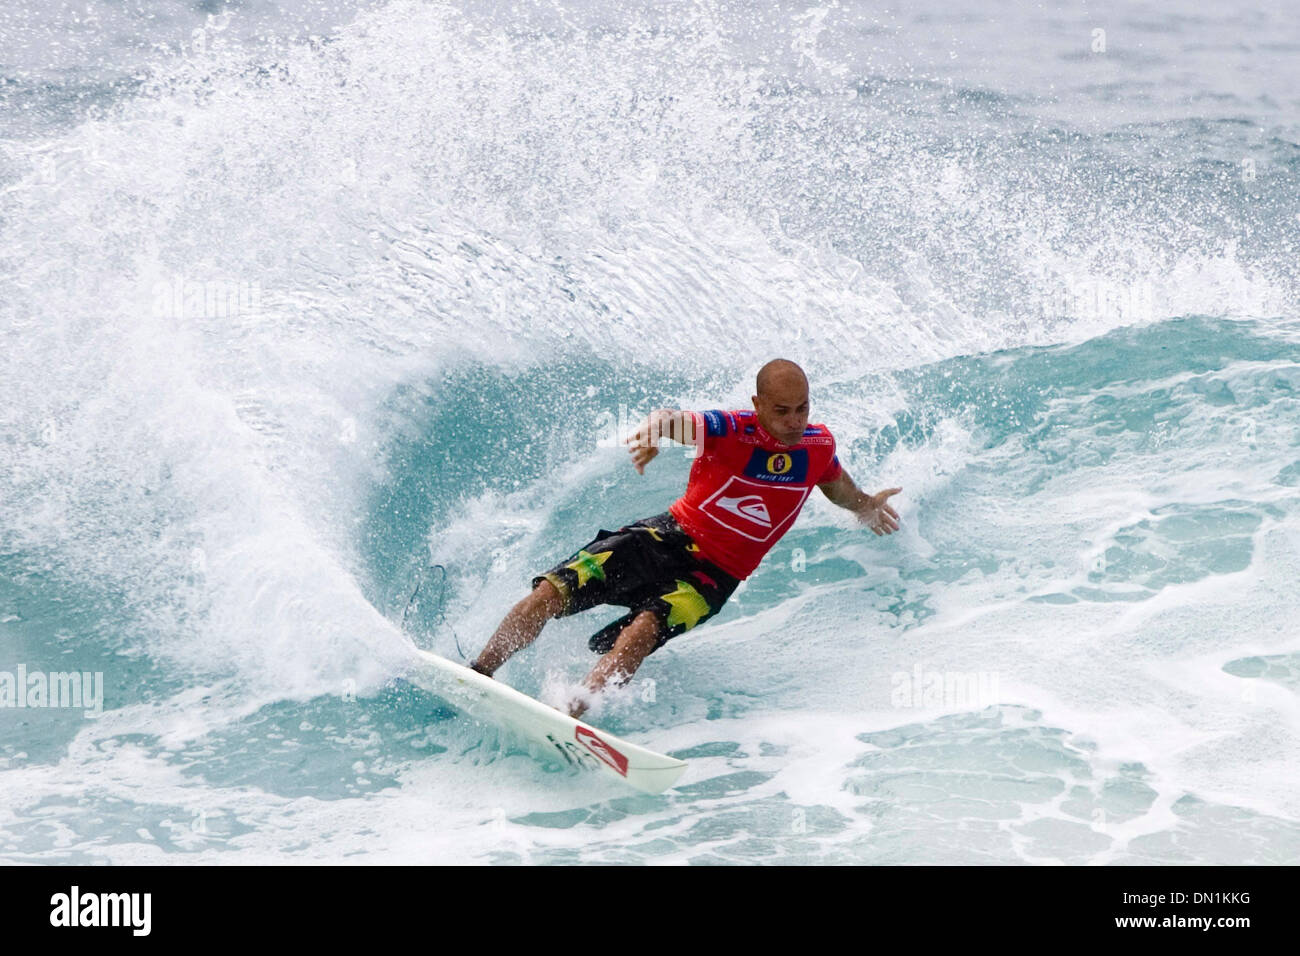 Feb 28, 2006; Snapper Rocks, Coolangatta, Queensland, AUSTRALIA; Seven times ASP world champion KELLY SLATER (Florida, USA) had a perfect start at the 2006 Quiksilver Pro presented by Samsung with a solid win in round one of the event taking place at Snapper Rocks on the Gold Coast of Australia today. Slater posted a near perfect score, 9.8 out of possible ten points, on his last w Stock Photo